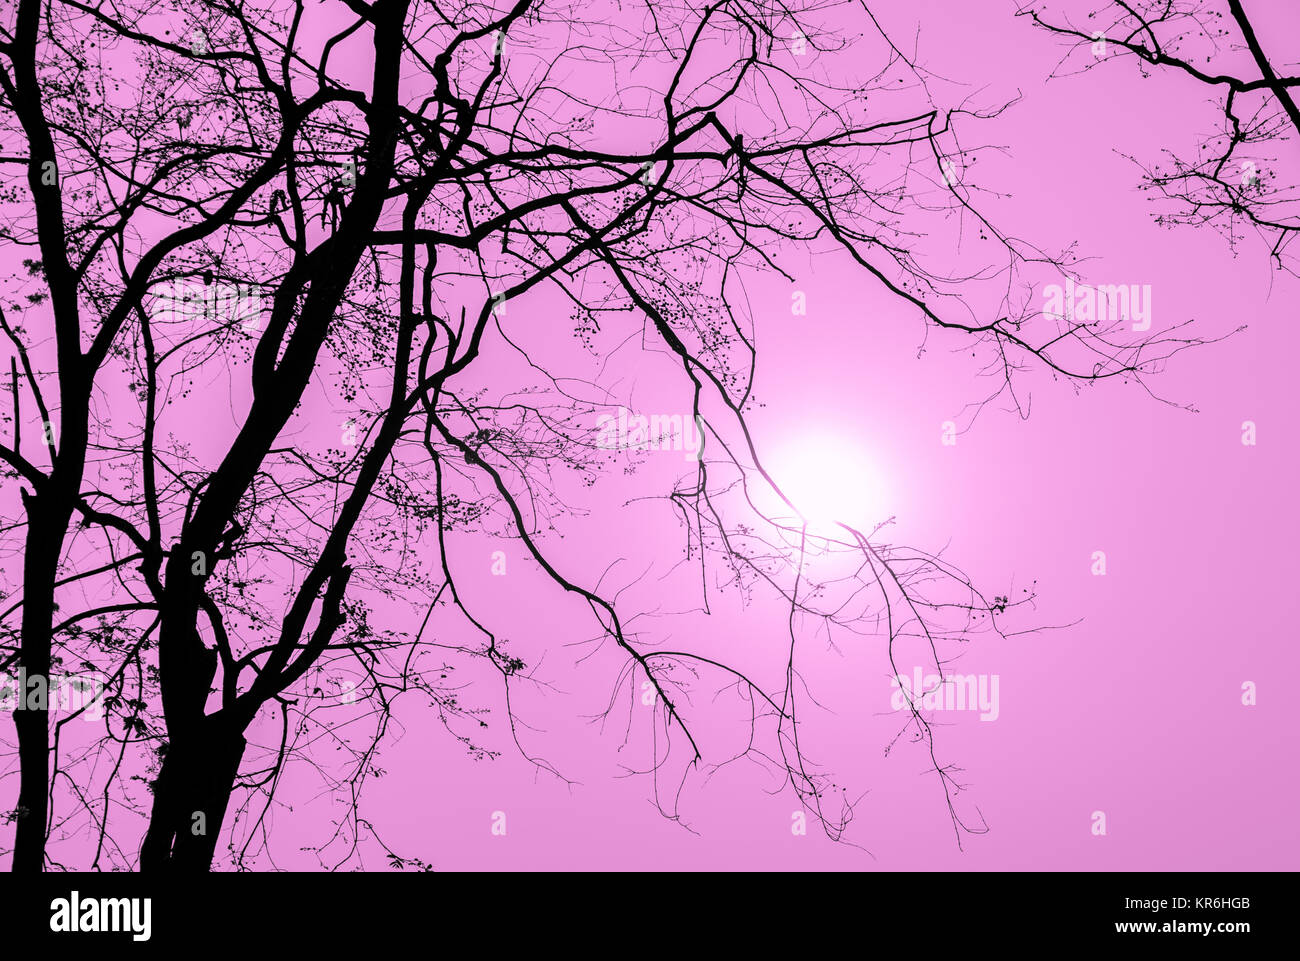 Silhouette tree branch in pink background Stock Photo